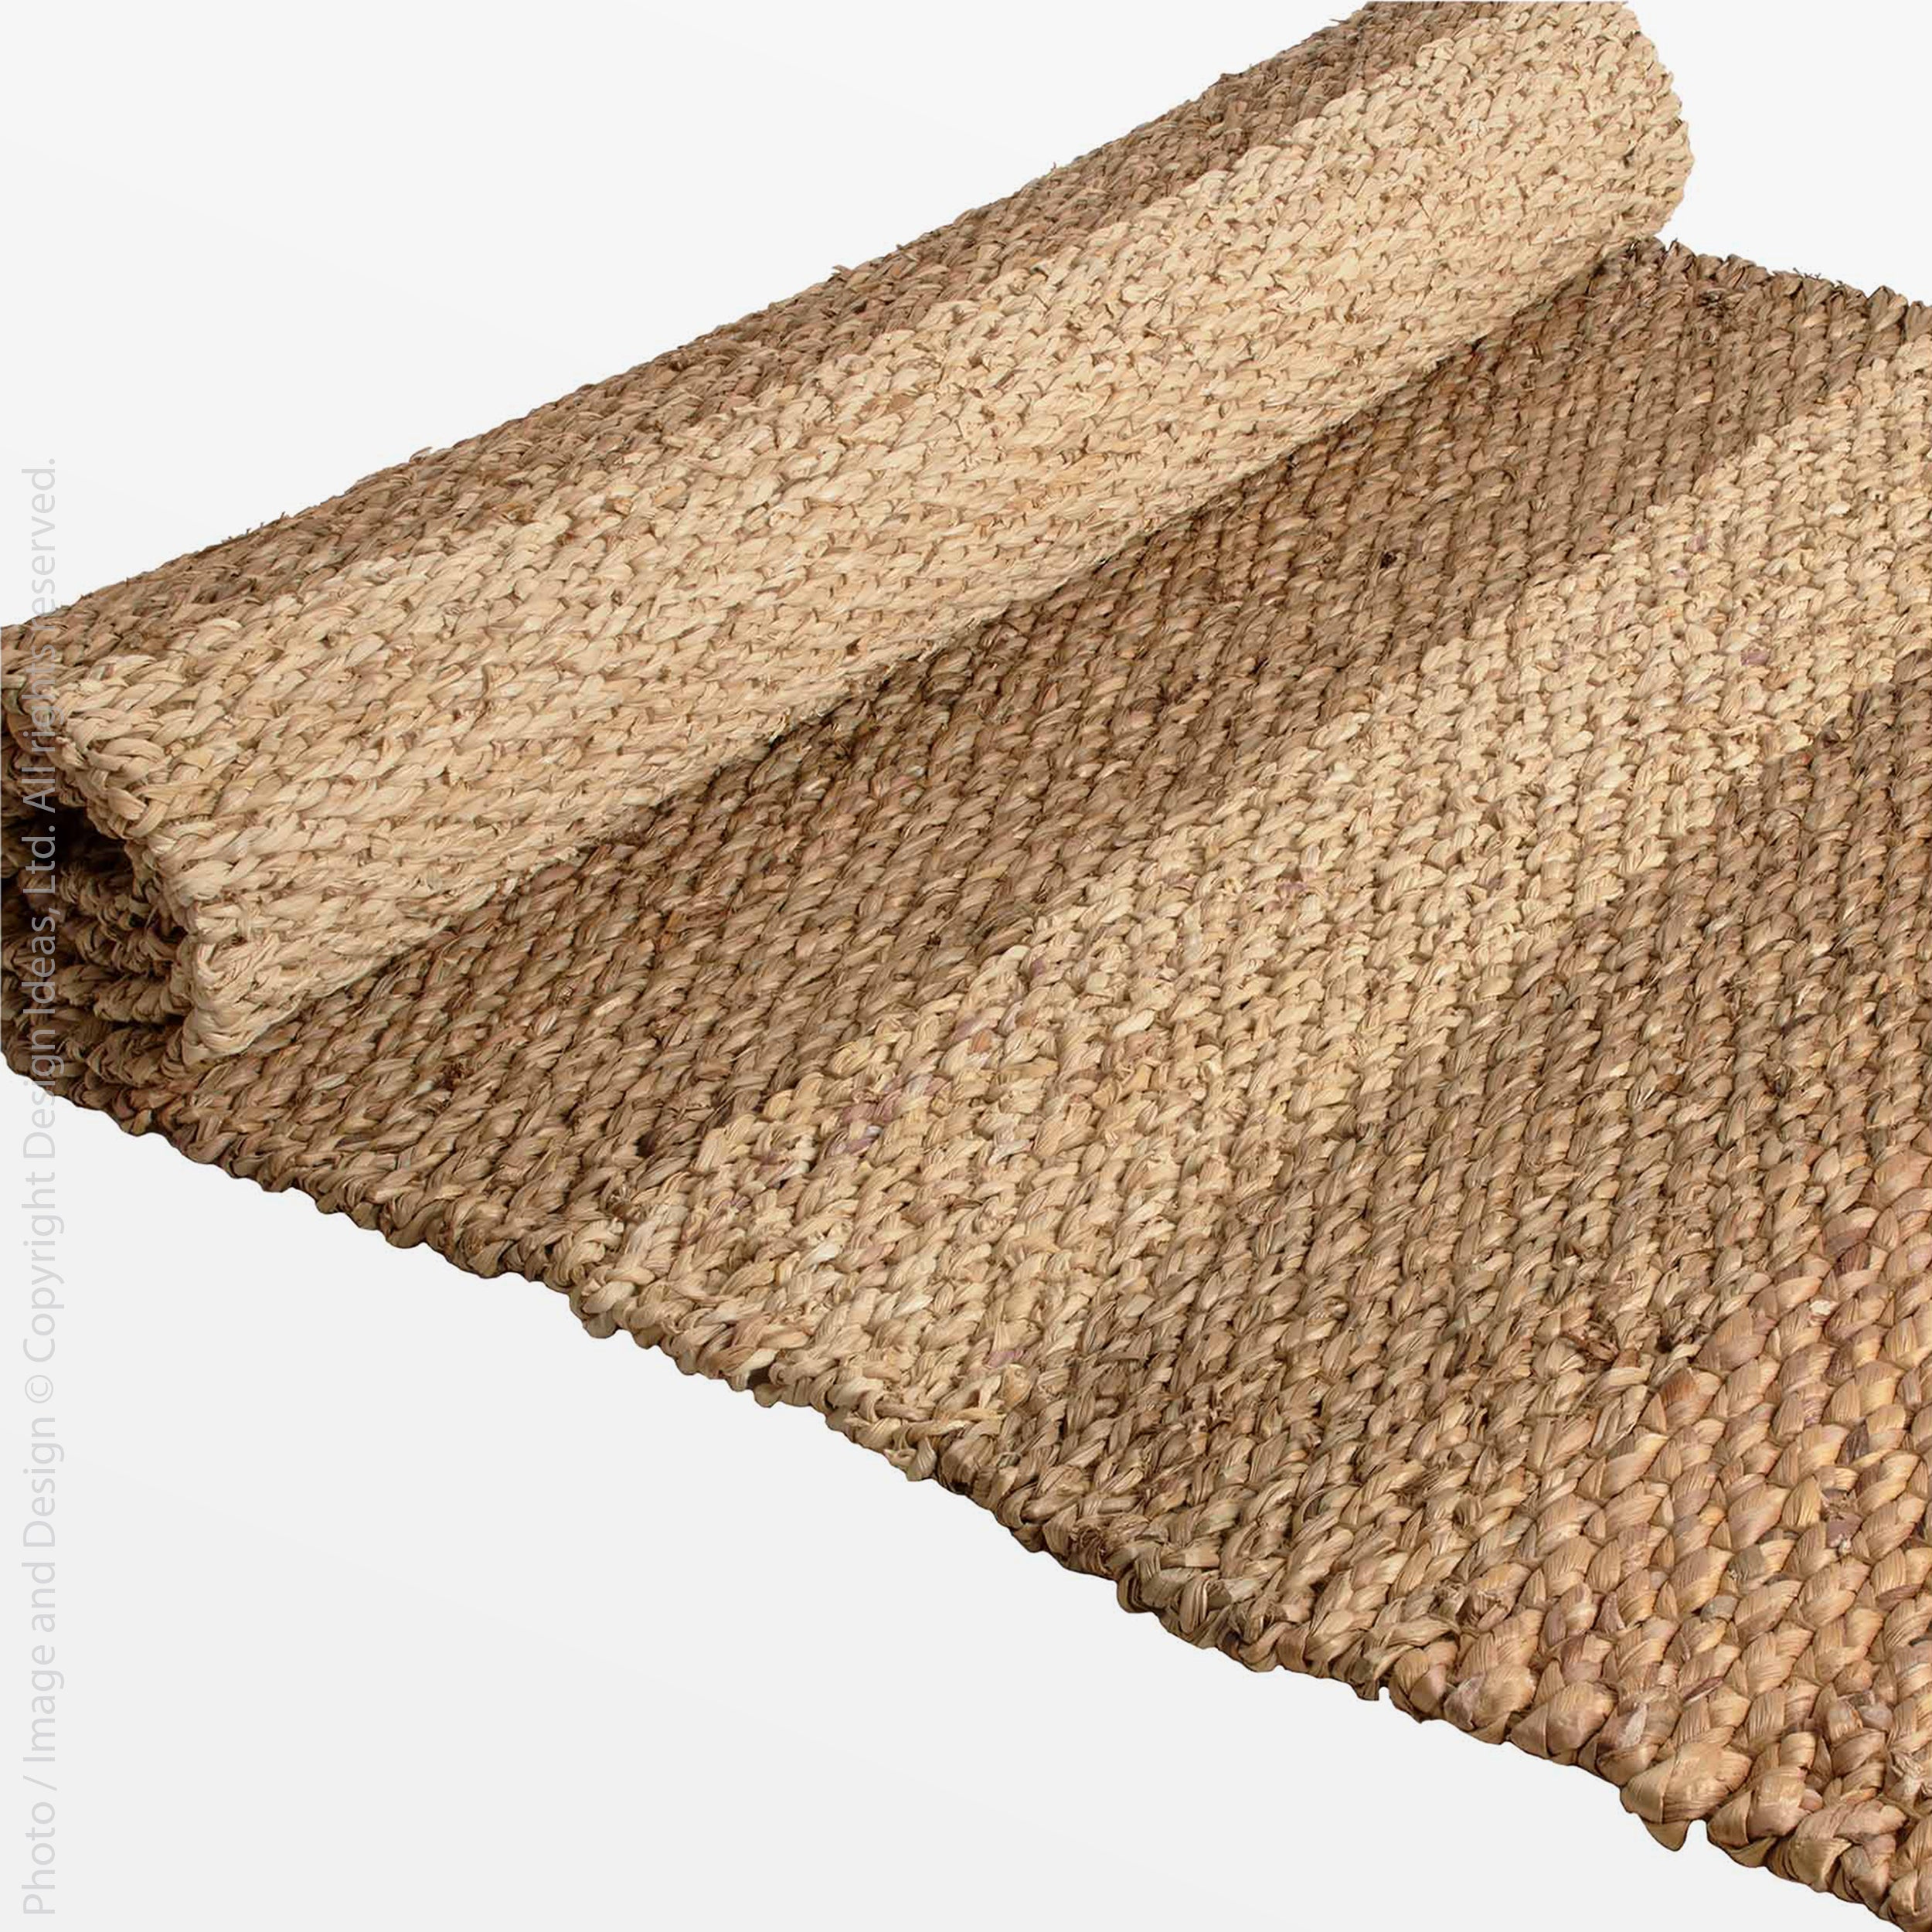 Barletta™ rug (60x96in.) - Natural | Image 2 | Premium Rug from the Barletta collection | made with Water Hyacinth Twine for long lasting use | texxture